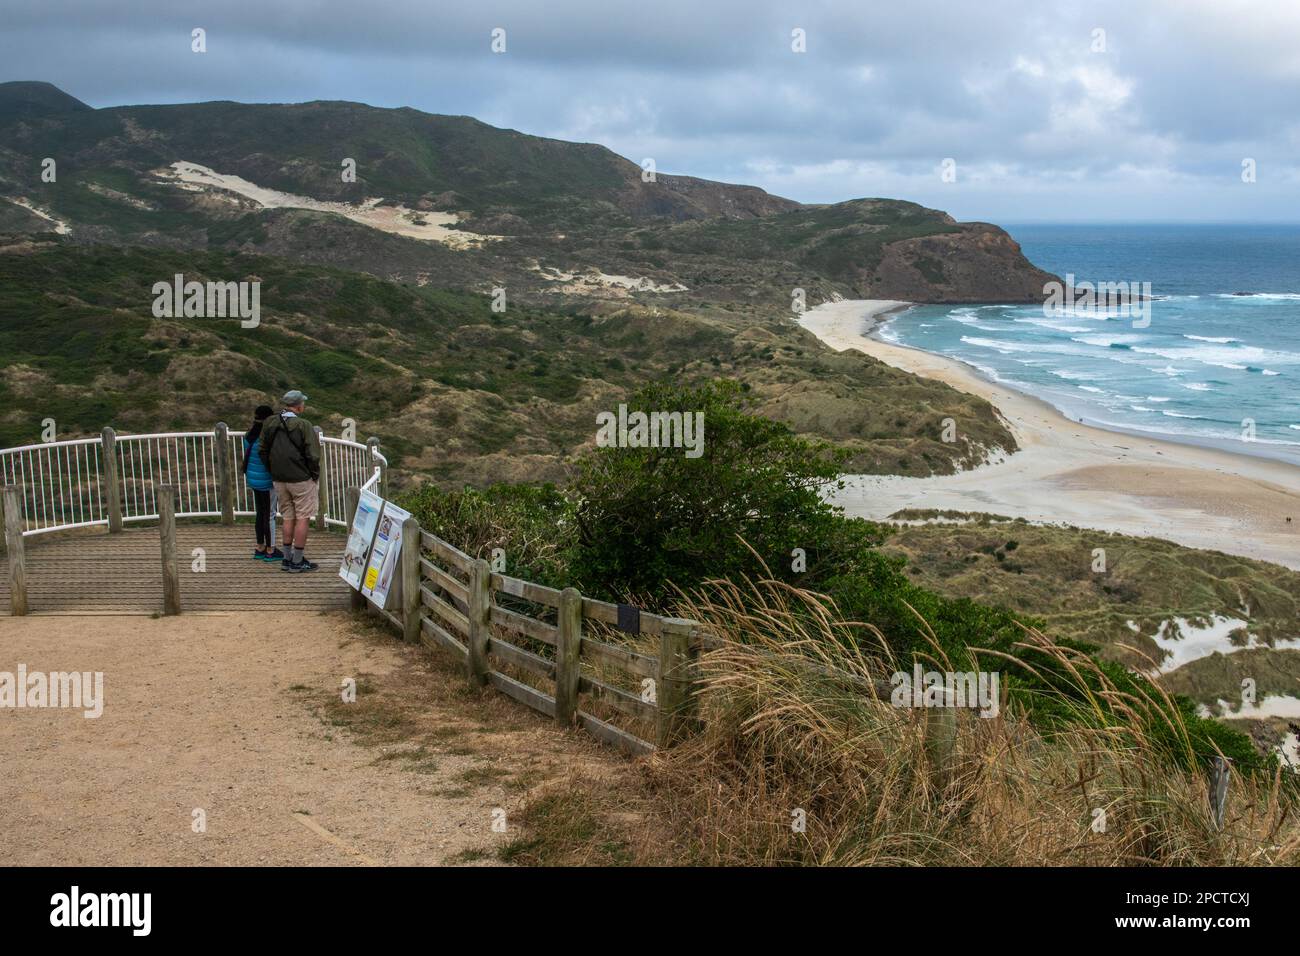 Visitors stand at a view point or scenic overlook looking out over the coastline of the Otago peninsula and Pacific ocean in New Zealand. Stock Photo